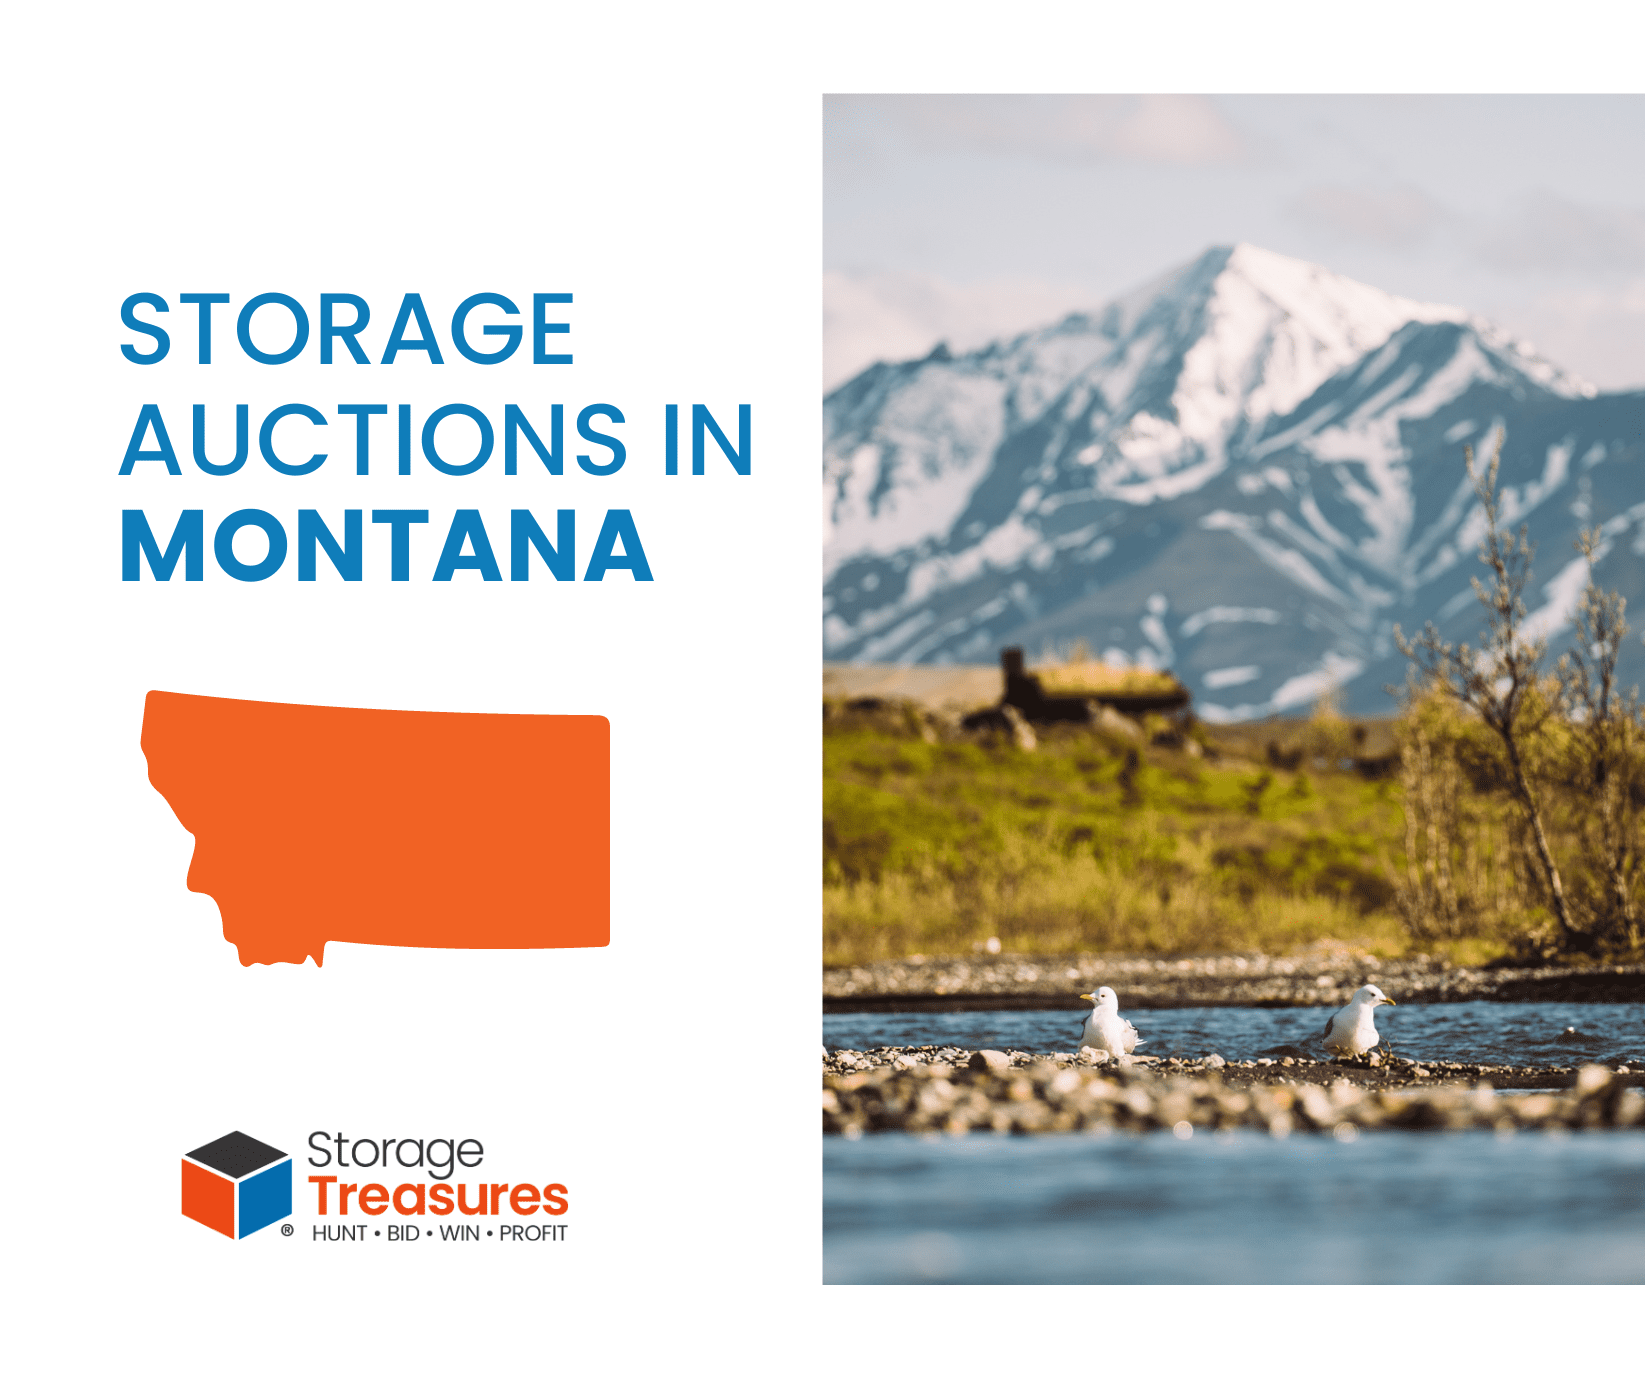 The Top-Selling Storage Auctions in Montana